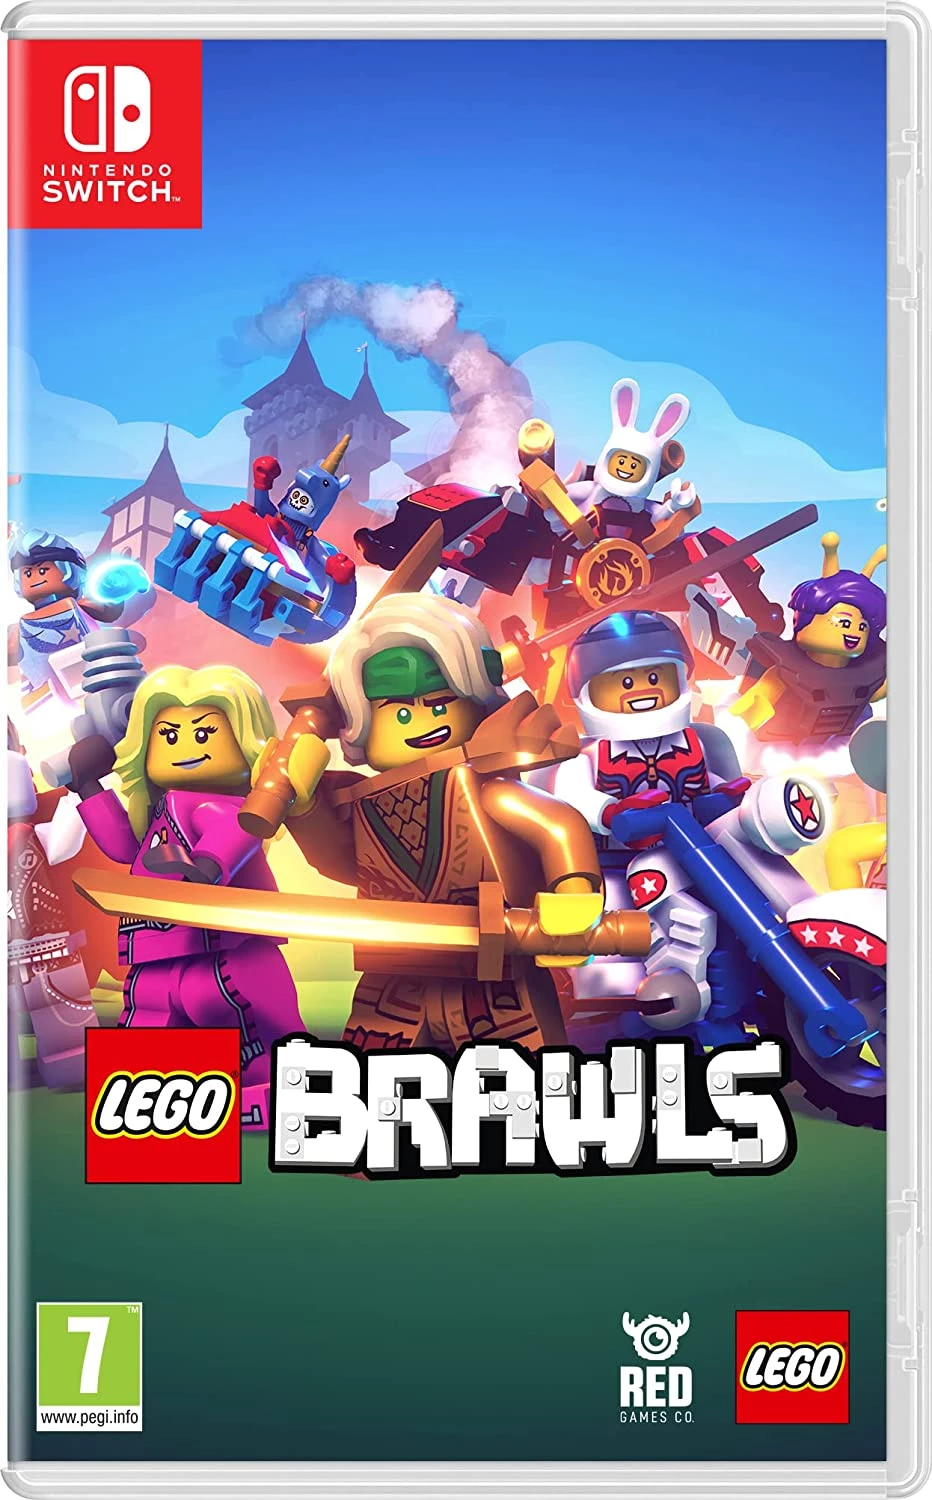 LEGO Brawls (Switch), Red Games Co.